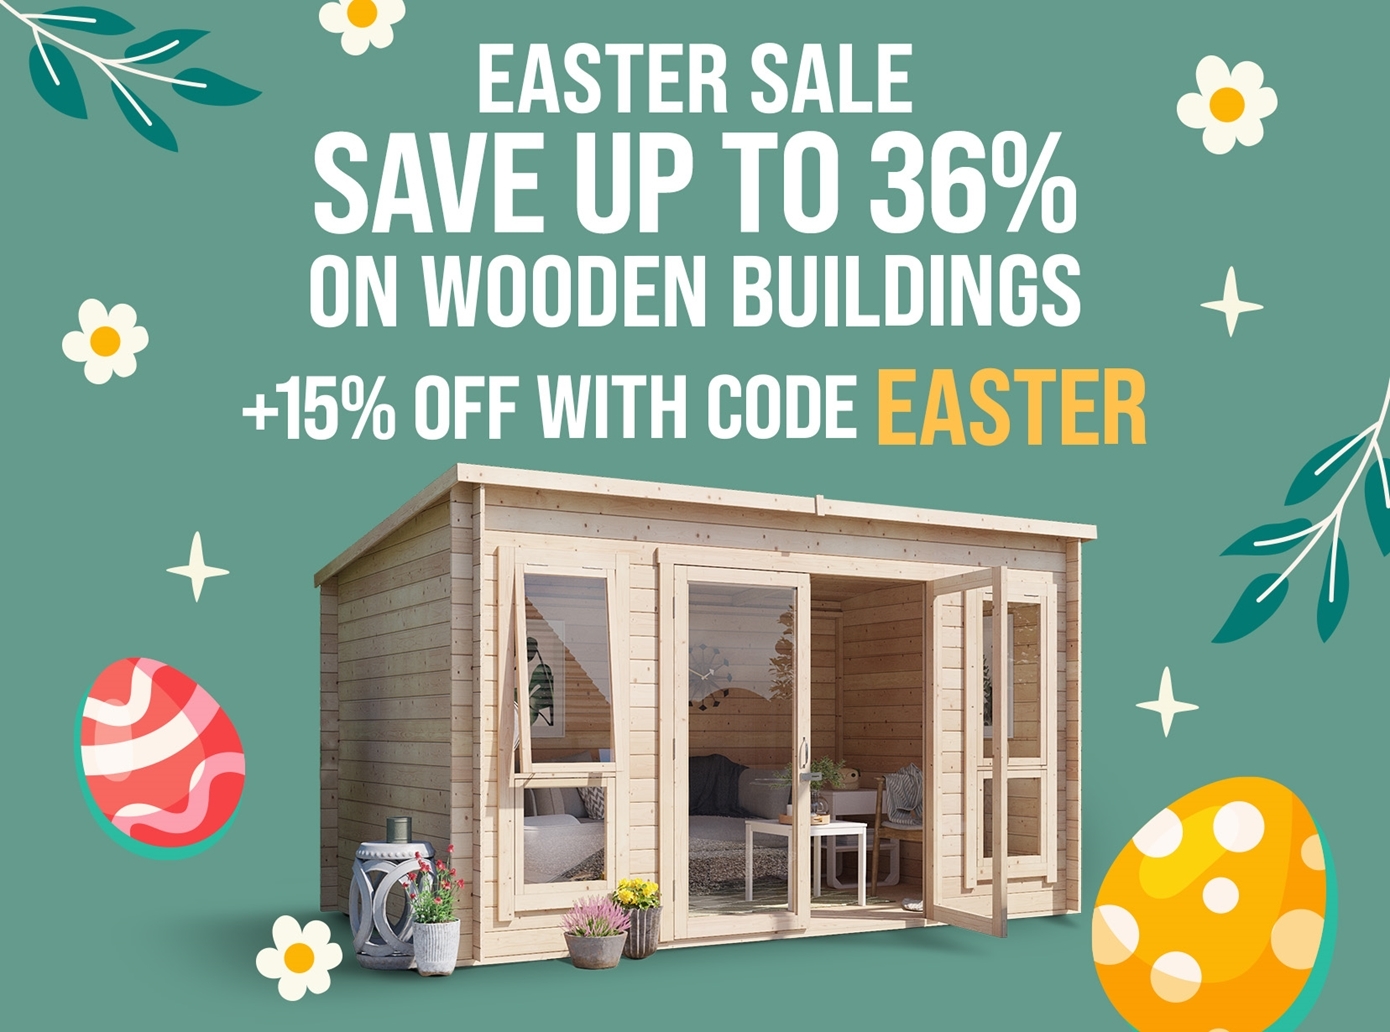 easter sale save up to 36% on wooden buildings